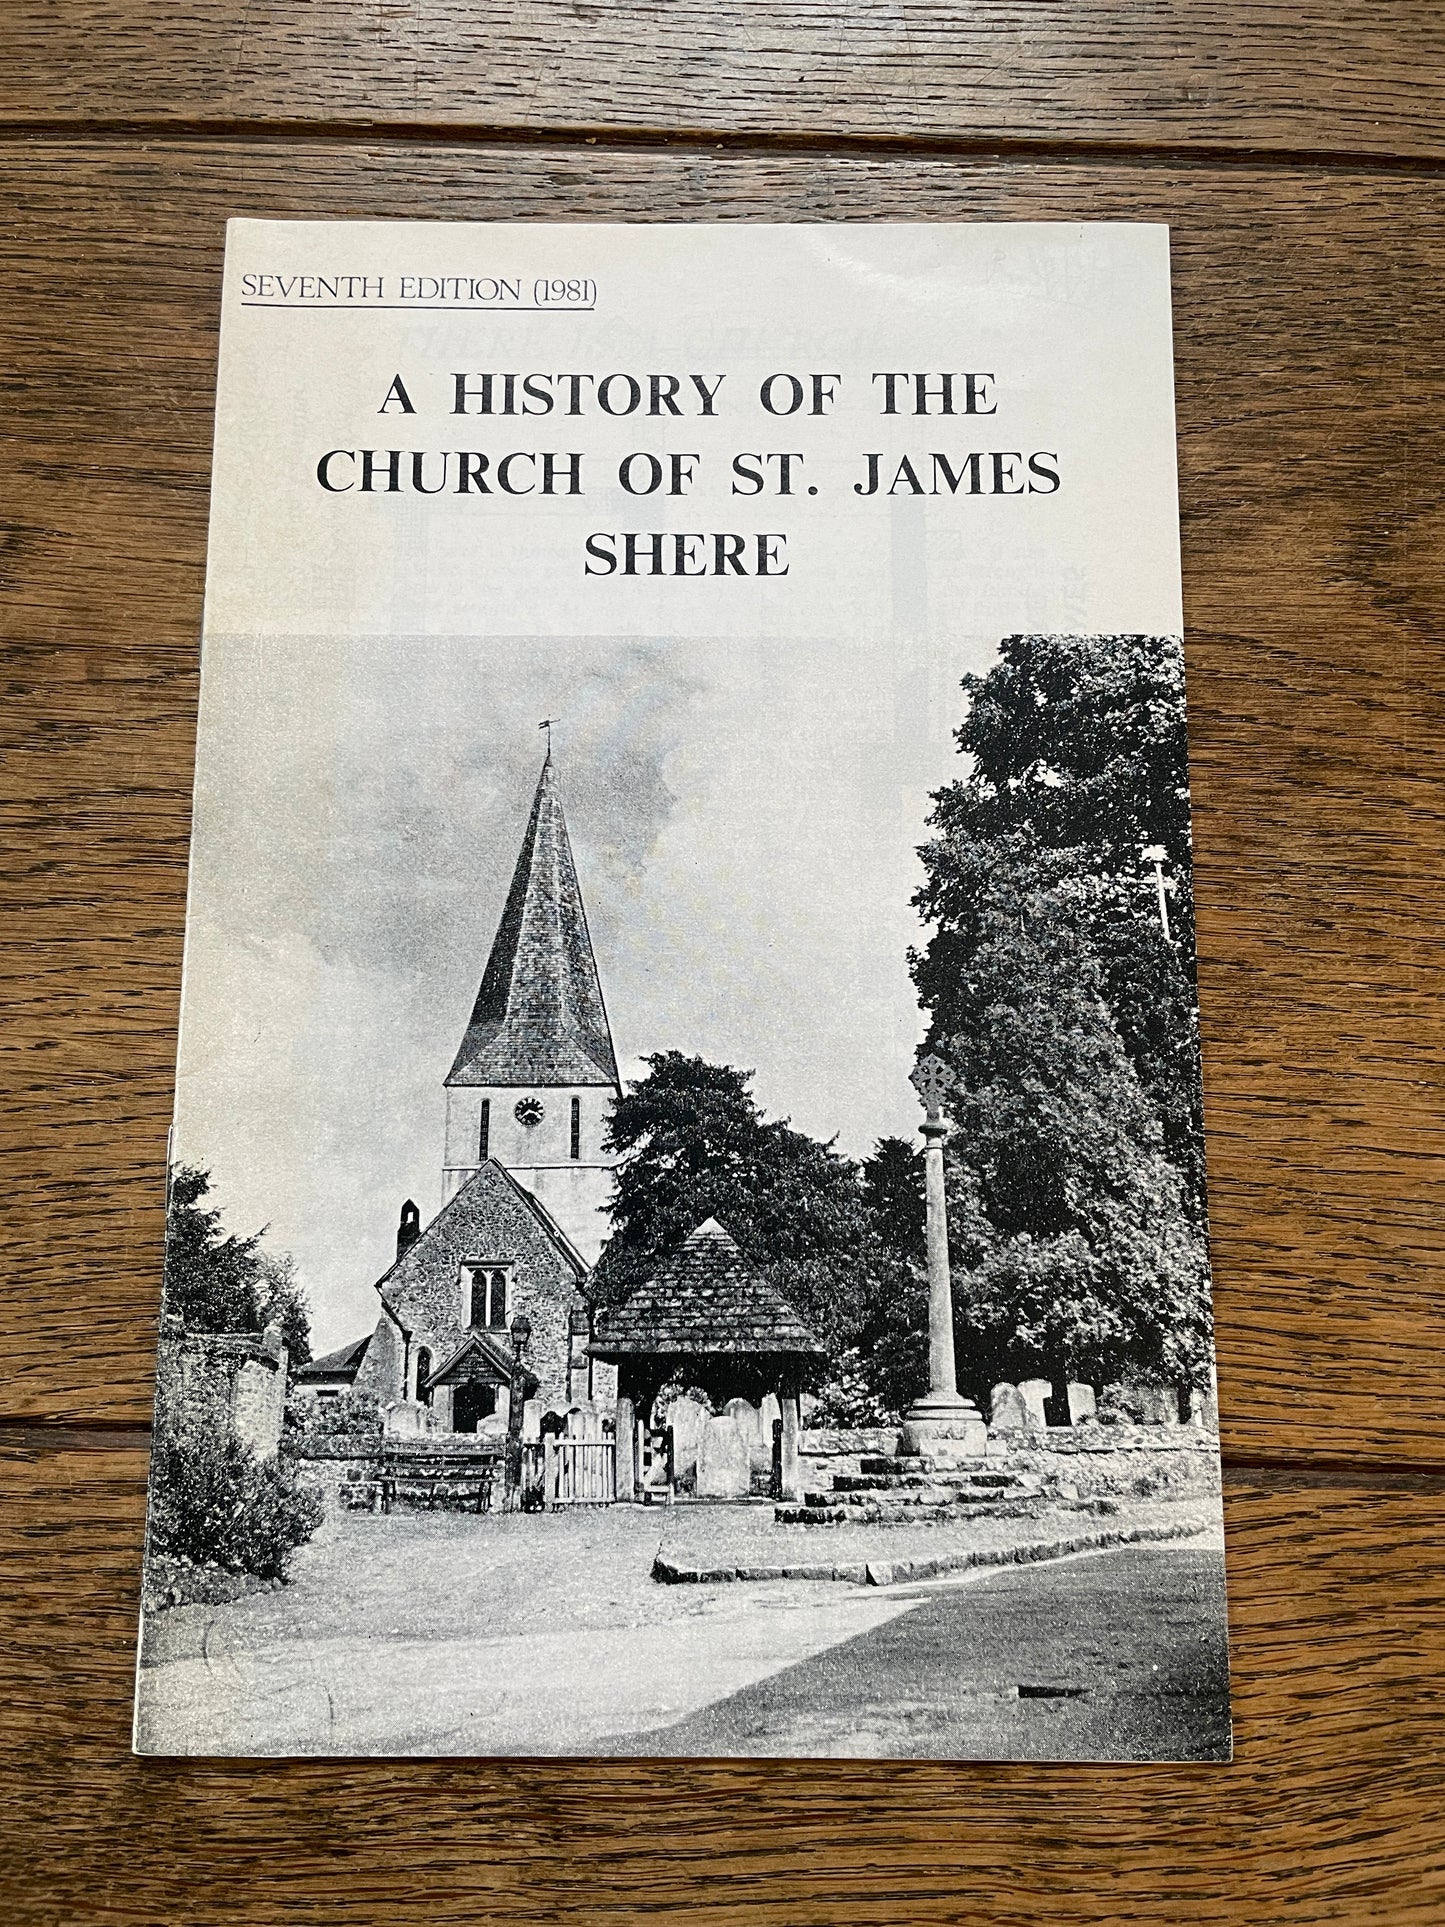 Two Documents on St. James' Church, Shere